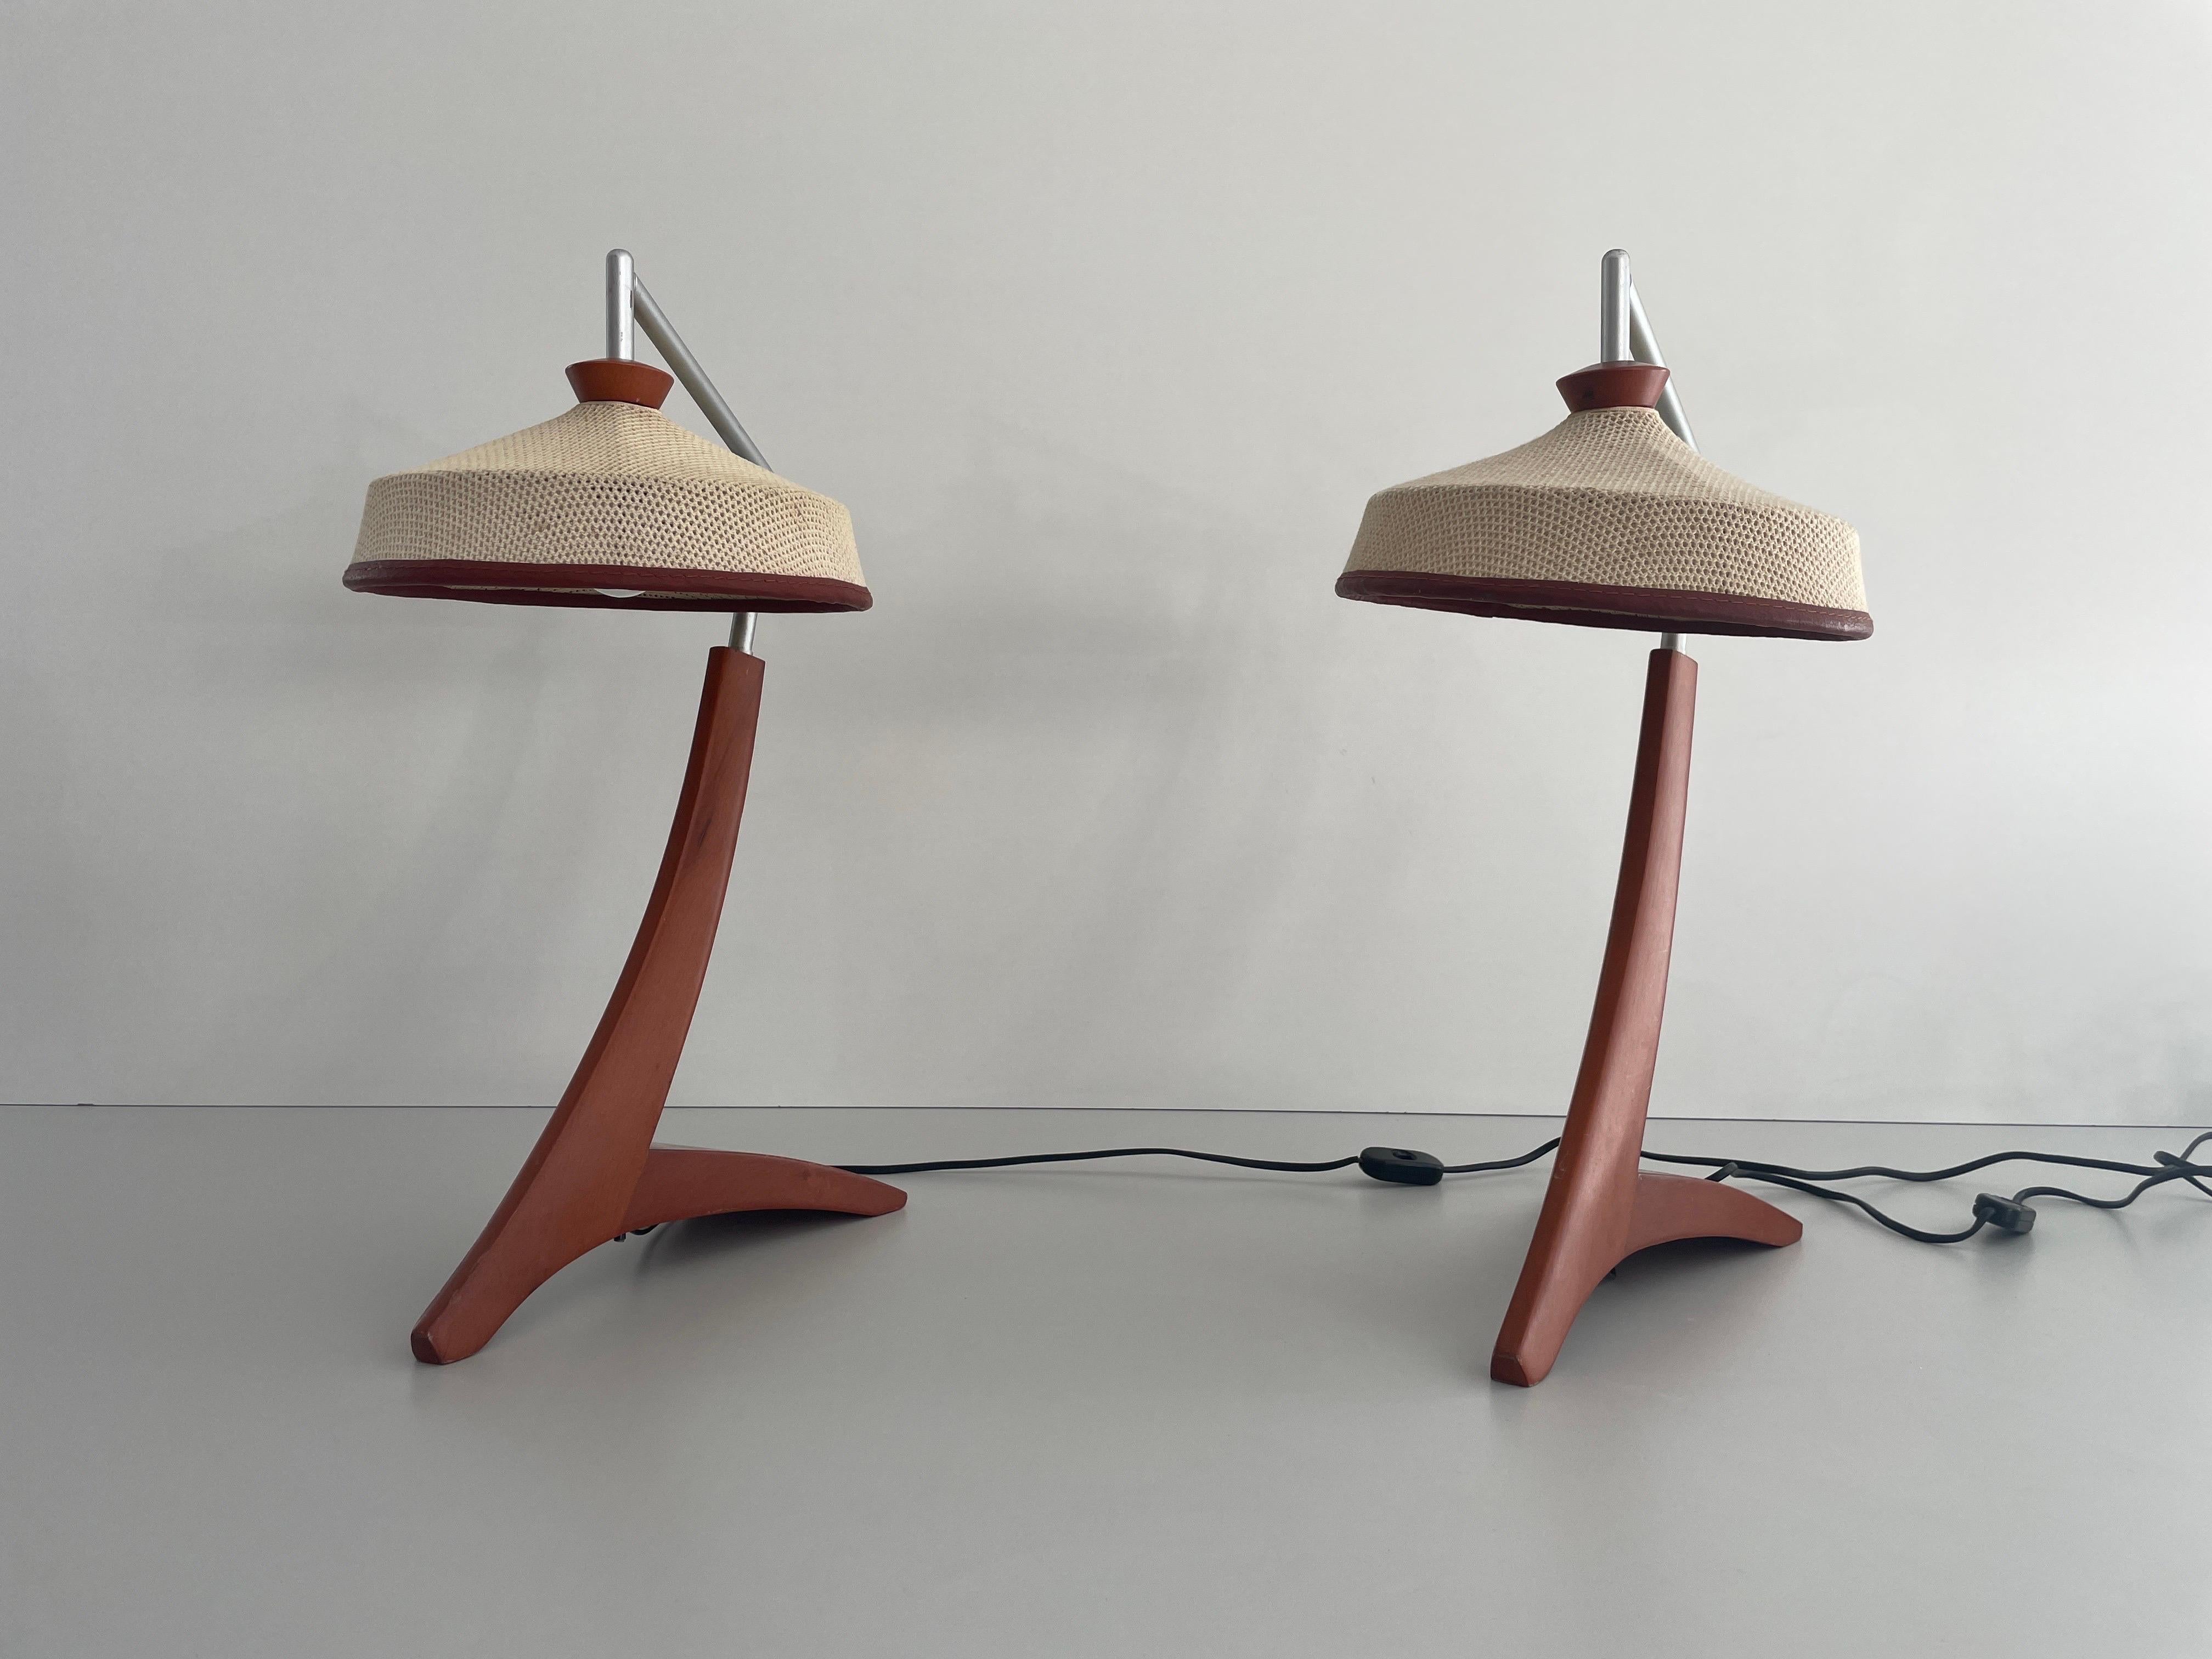  Wood and Woven Thread shade Pair of Tall Table Lamps, 1960s, Italy

Lampshade is in very good vintage condition.

It has European plug. It can be converted to other countries plugs with using converter. Also it can be rewired different type of